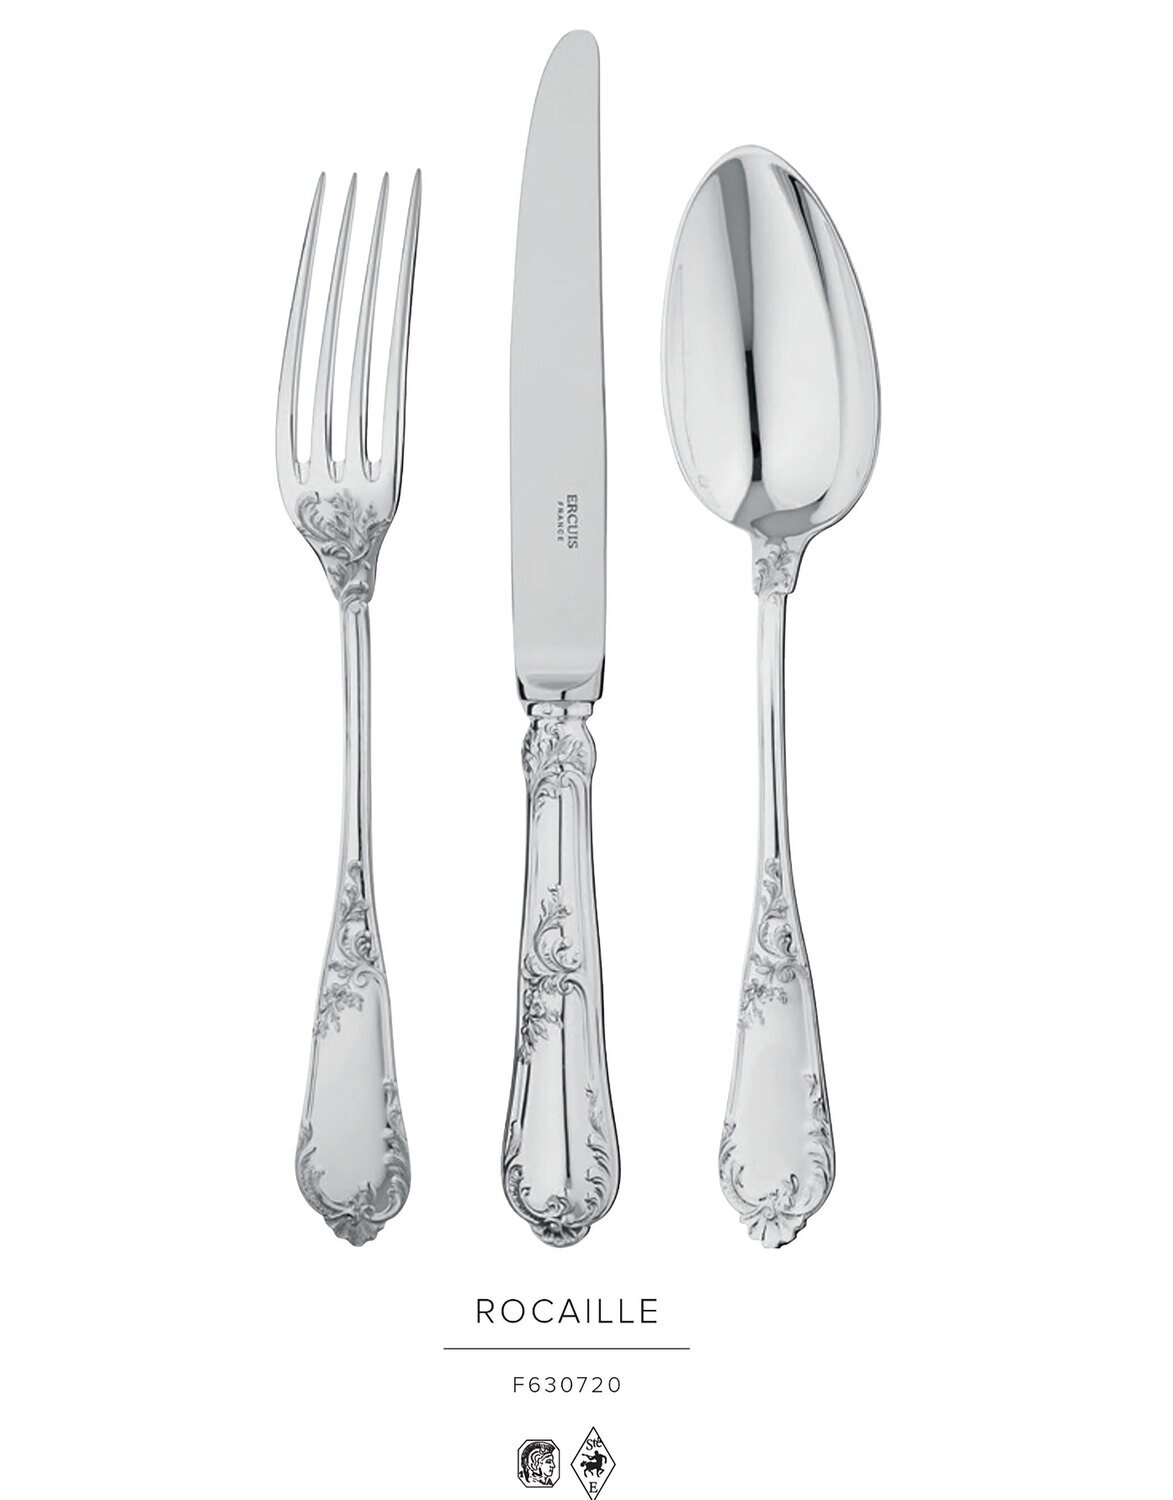 Ercuis Rocaille 5 Piece Place Setting with Anti-Tarnish Bag Sterling Silver F630720-DF